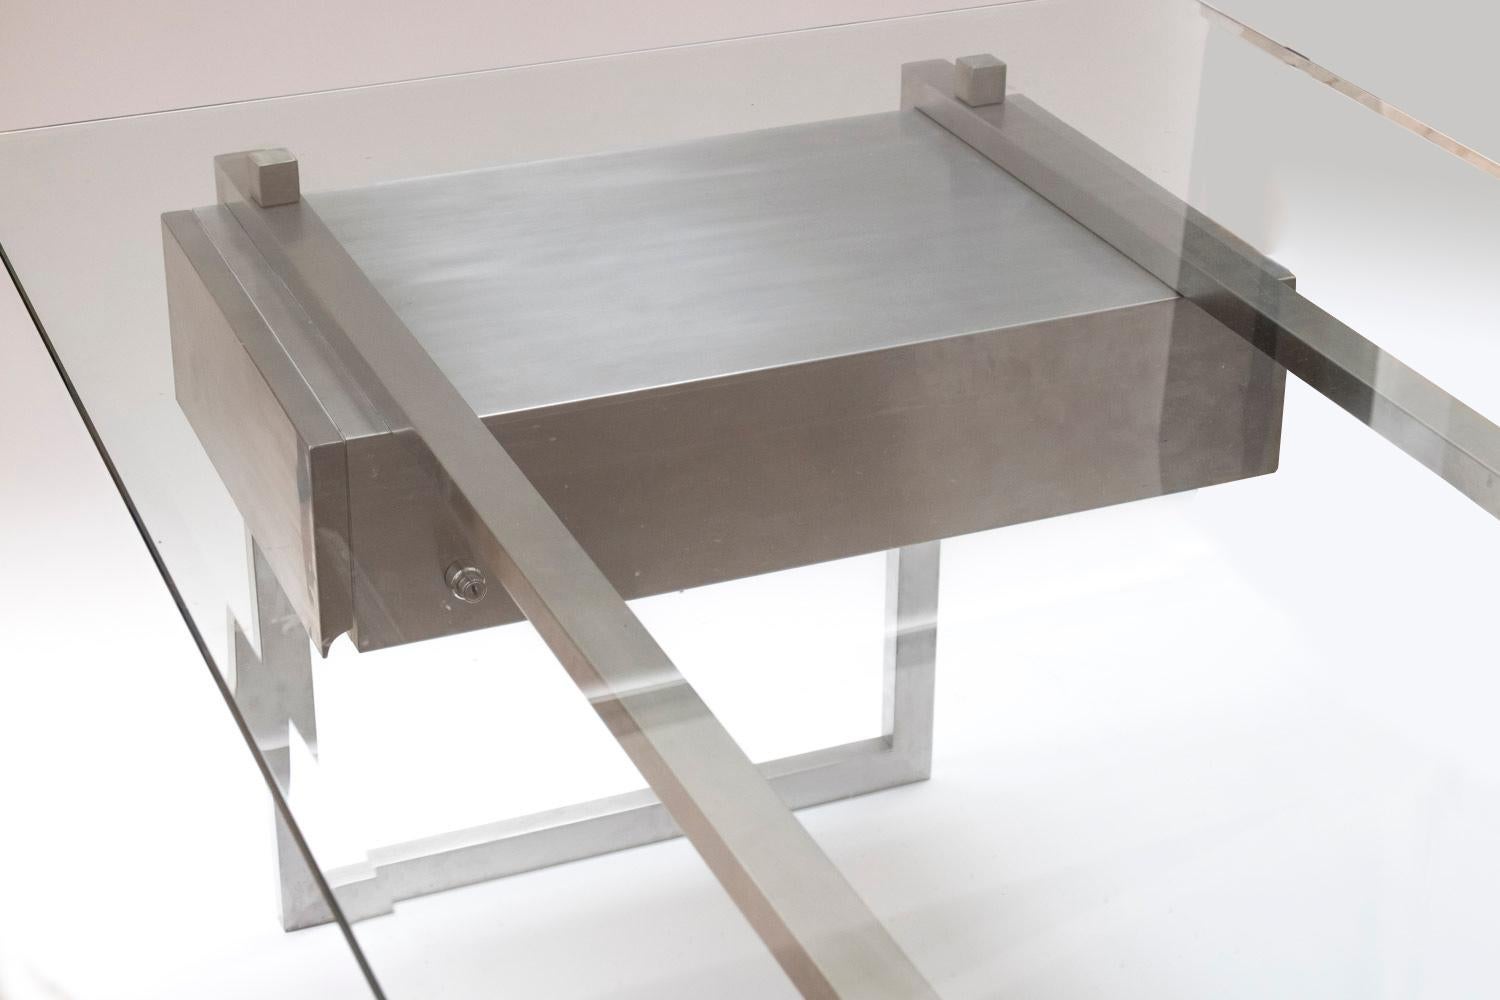 Late 20th Century Brushed Stainless Steel President Desk Glass Top, Patrice Maffei, circa 1970